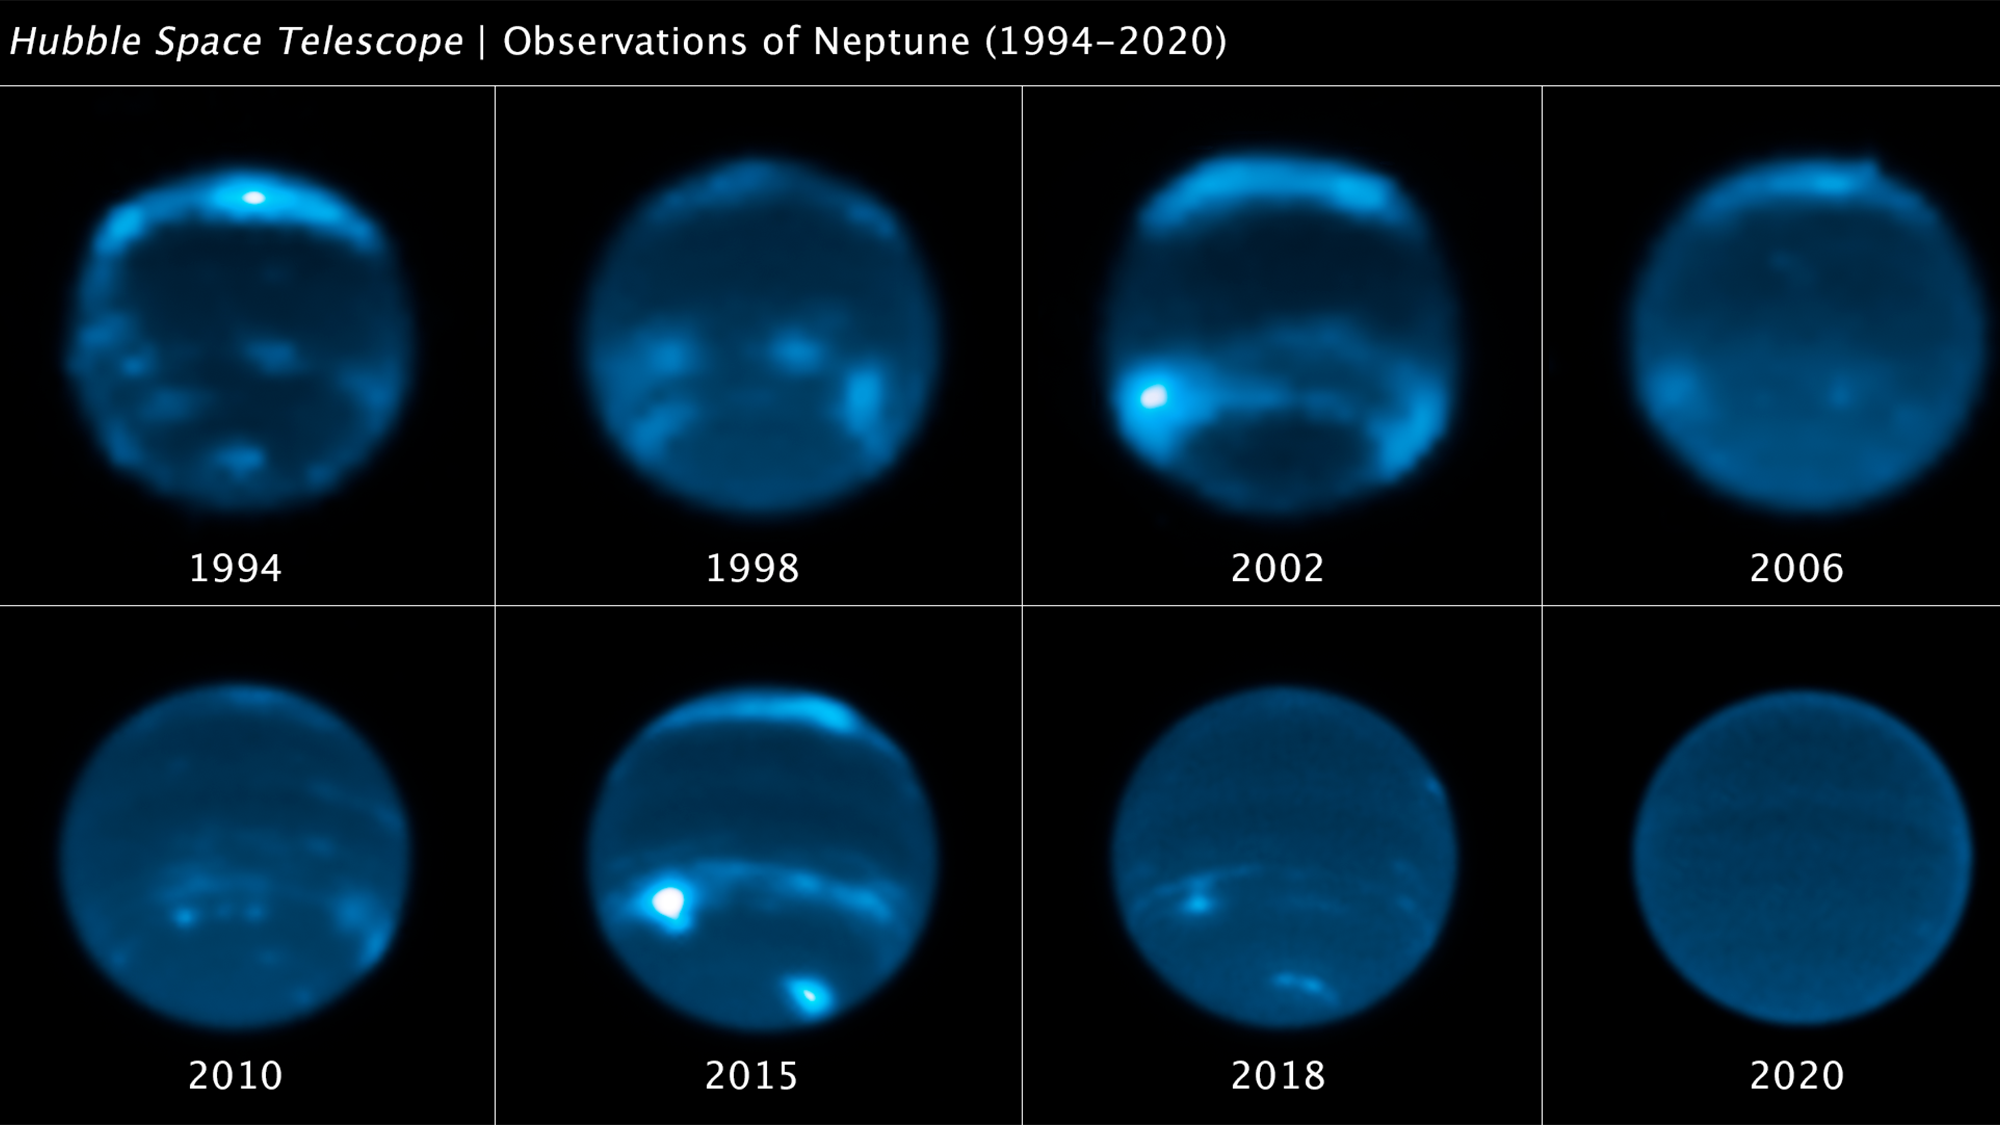 A sequence of Hubble Space Telescope images from 1994 to 2020 that chronicles the waxing and waning of the amount of cloud cover on Neptune. This long set of observations shows that the number of clouds grows increasingly following a peak in the solar cycle.